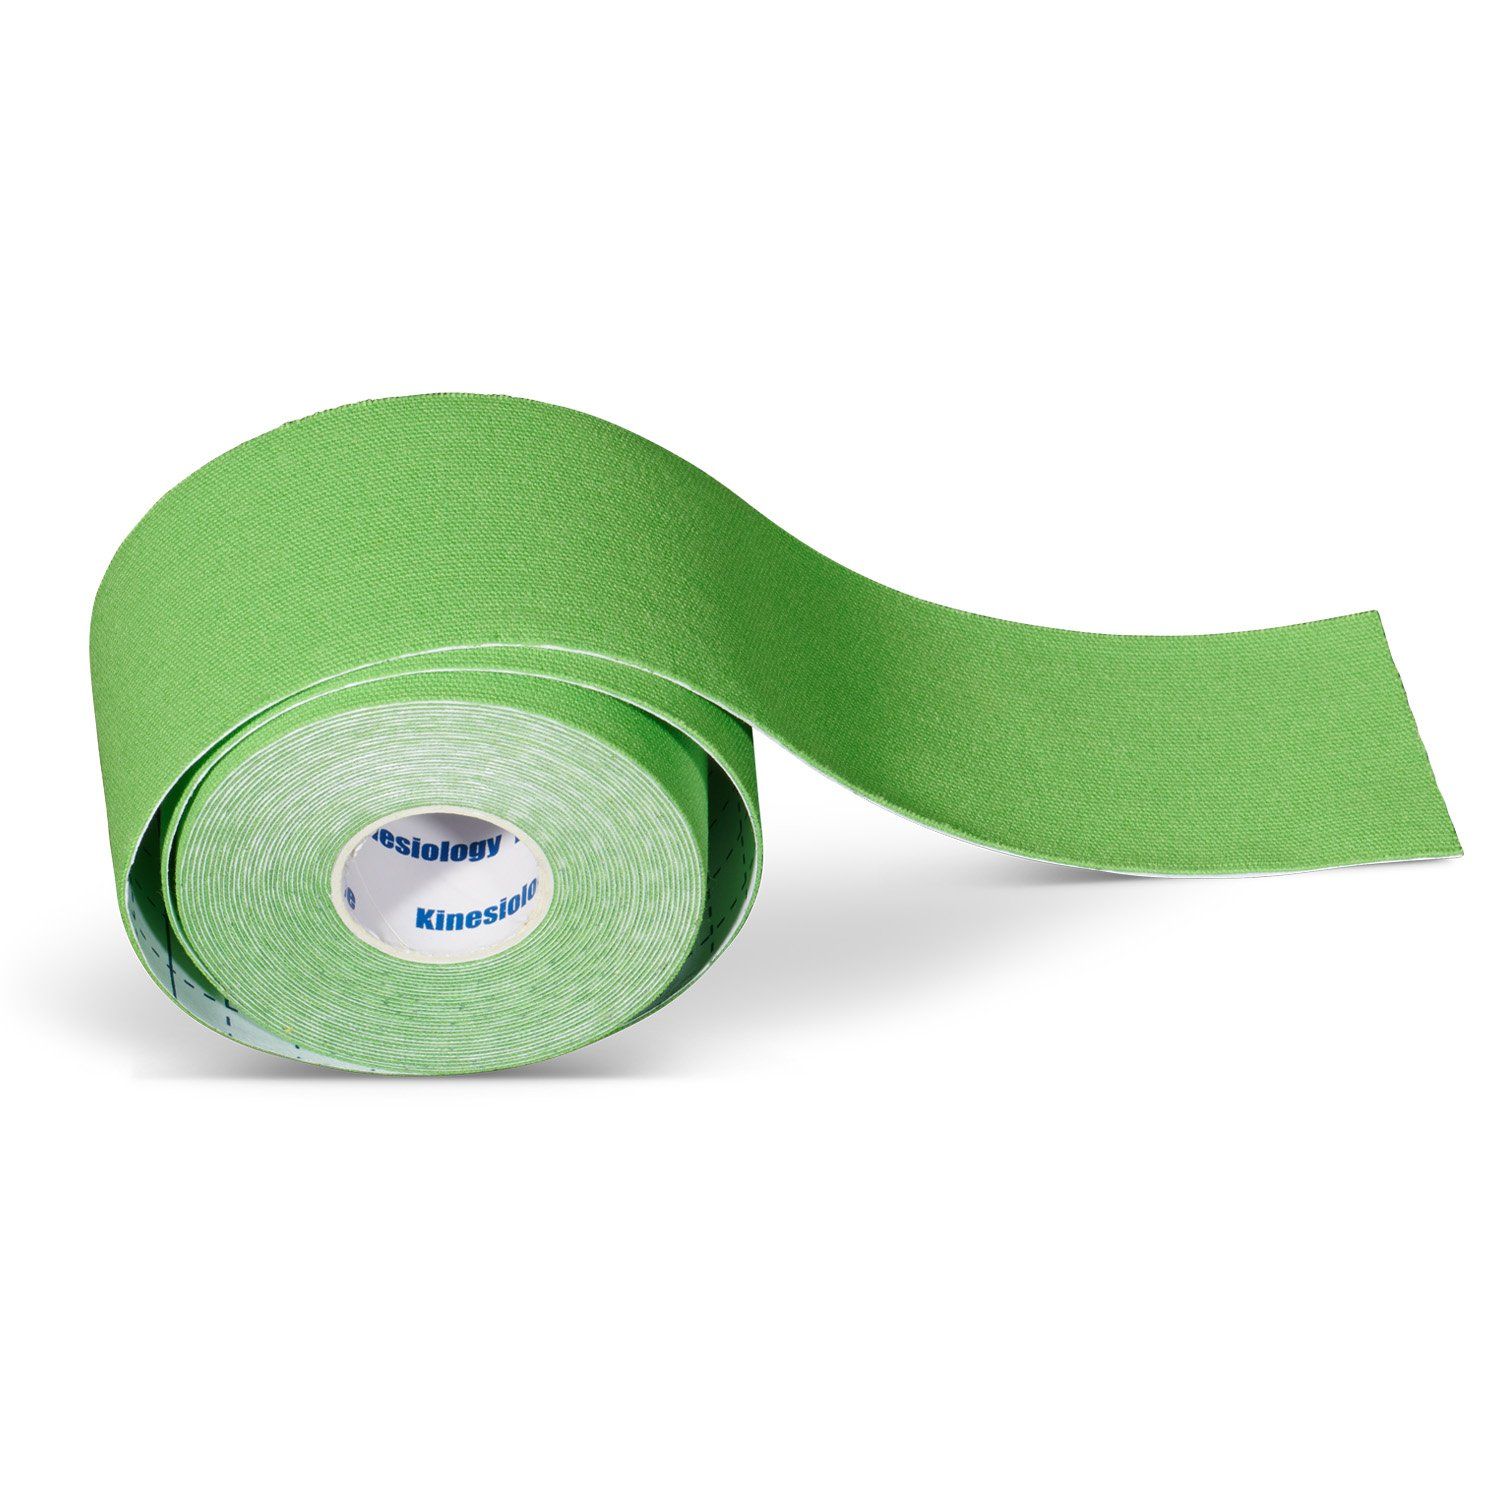 kinesiology tape 4 rolls plus 1 roll for free green